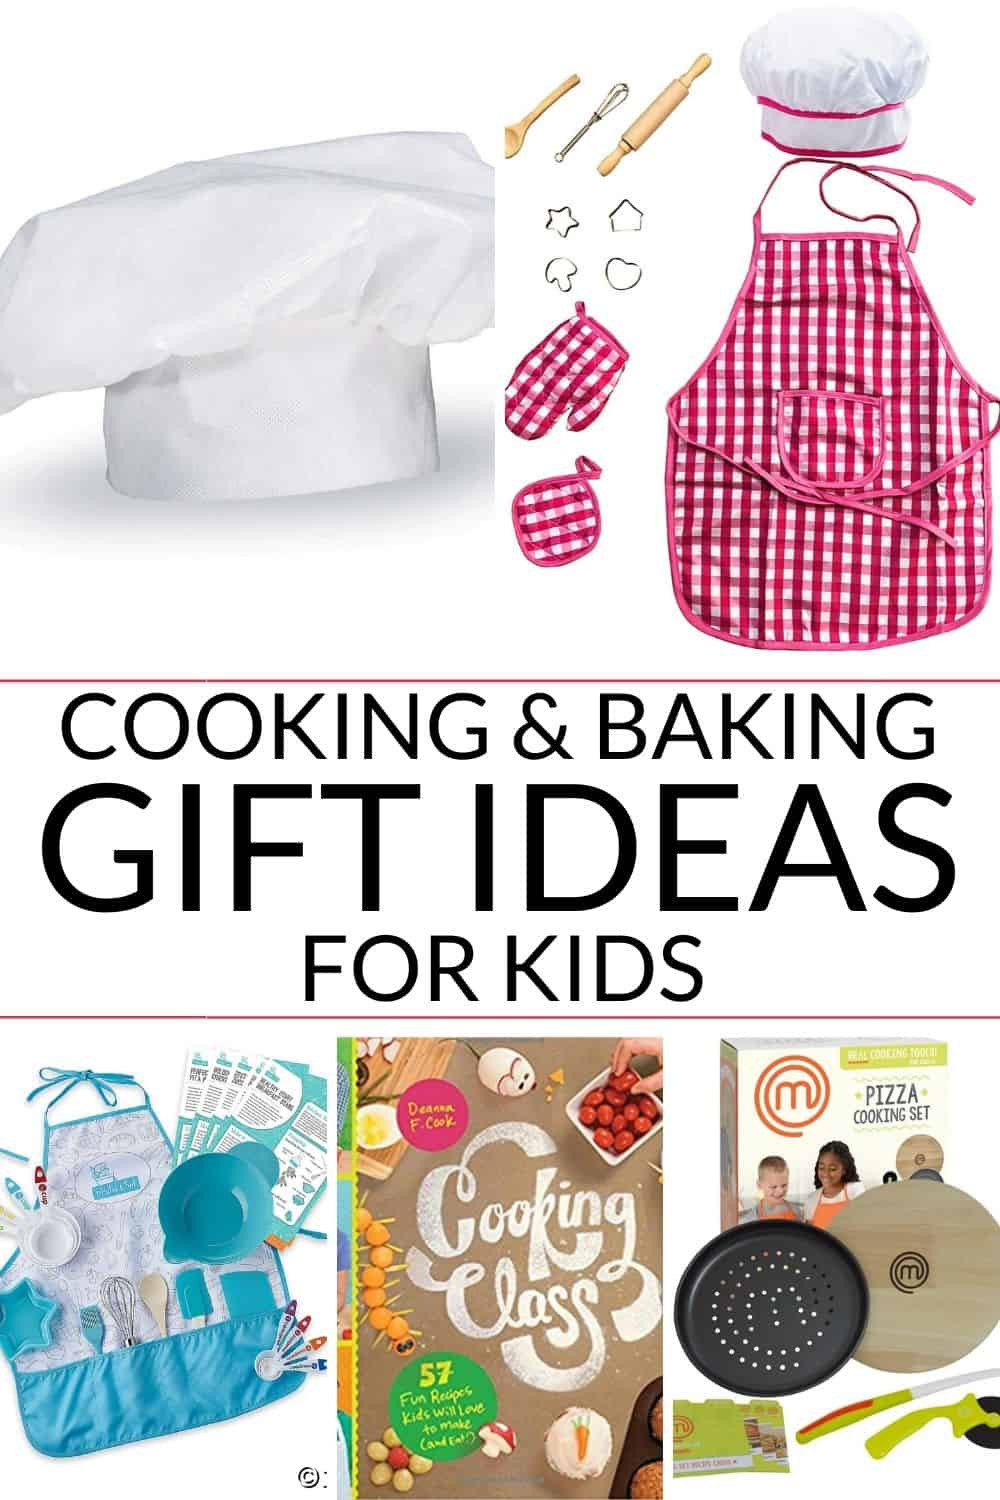 Kids Cooking Gift Ideas
 Fun Kids Cooking Gift Ideas for Boys and Girls